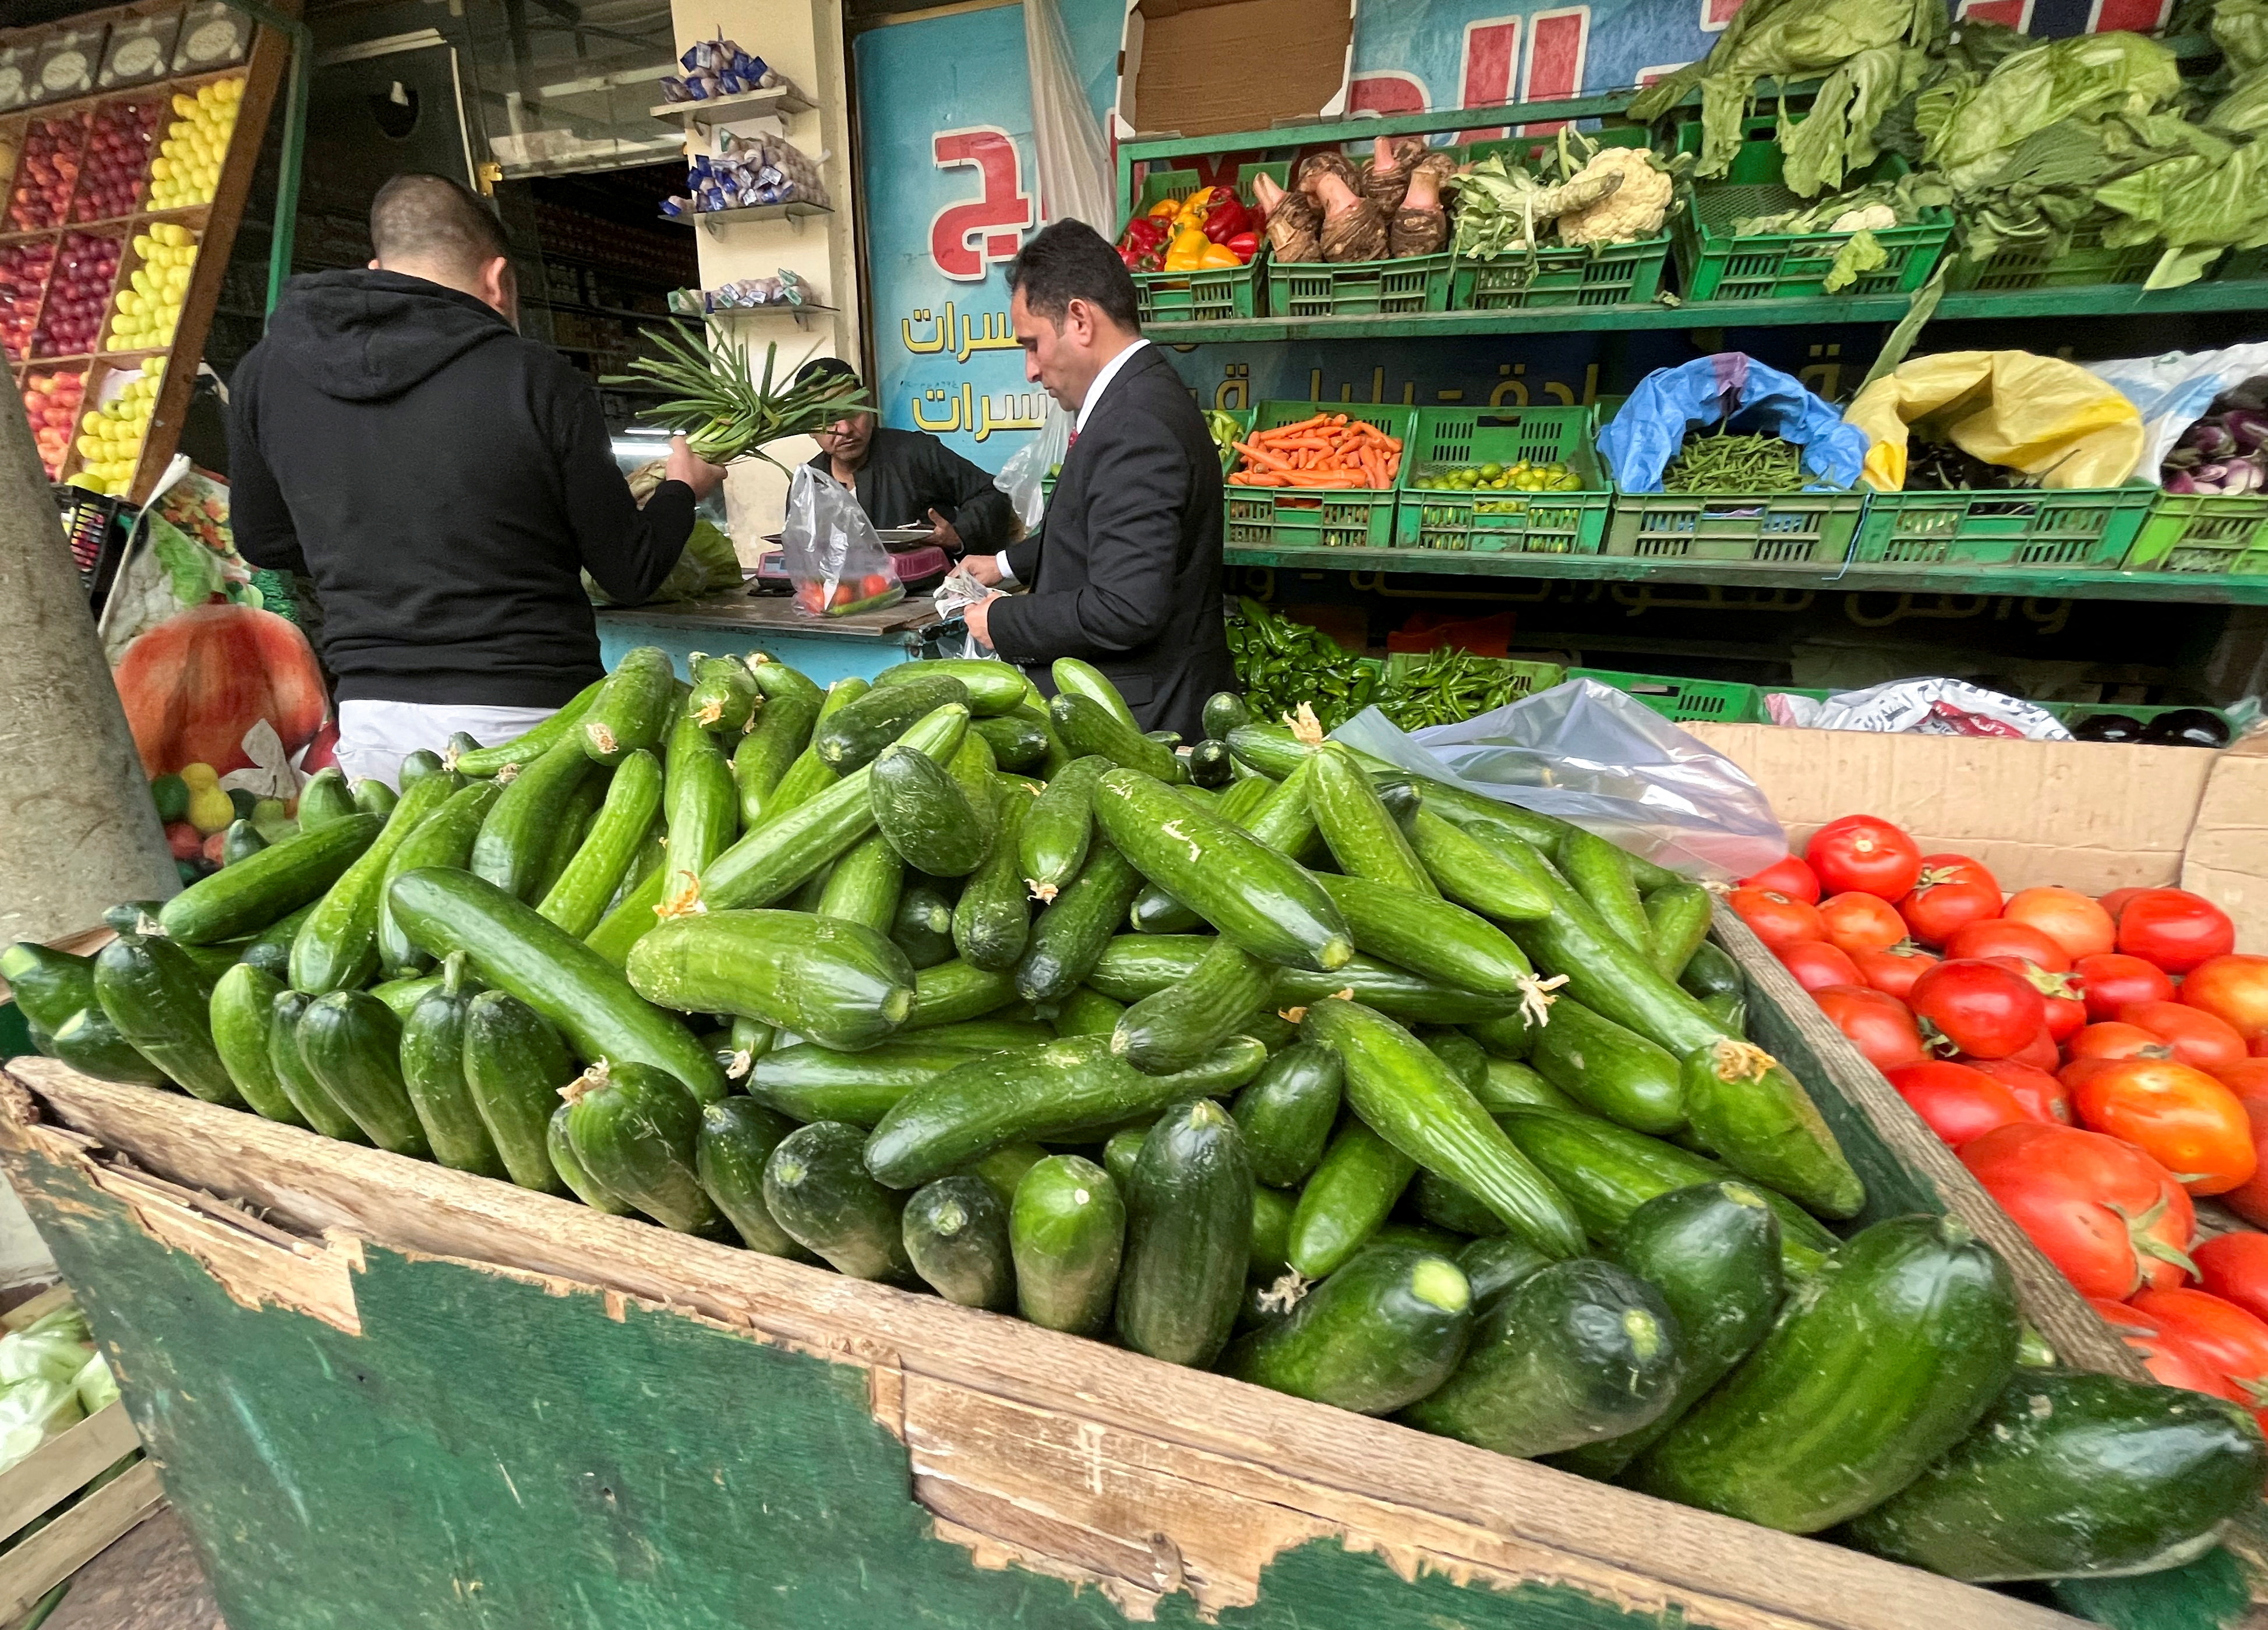 Egyptians buy vegetables at a market in Maadi, a suburb of Cairo